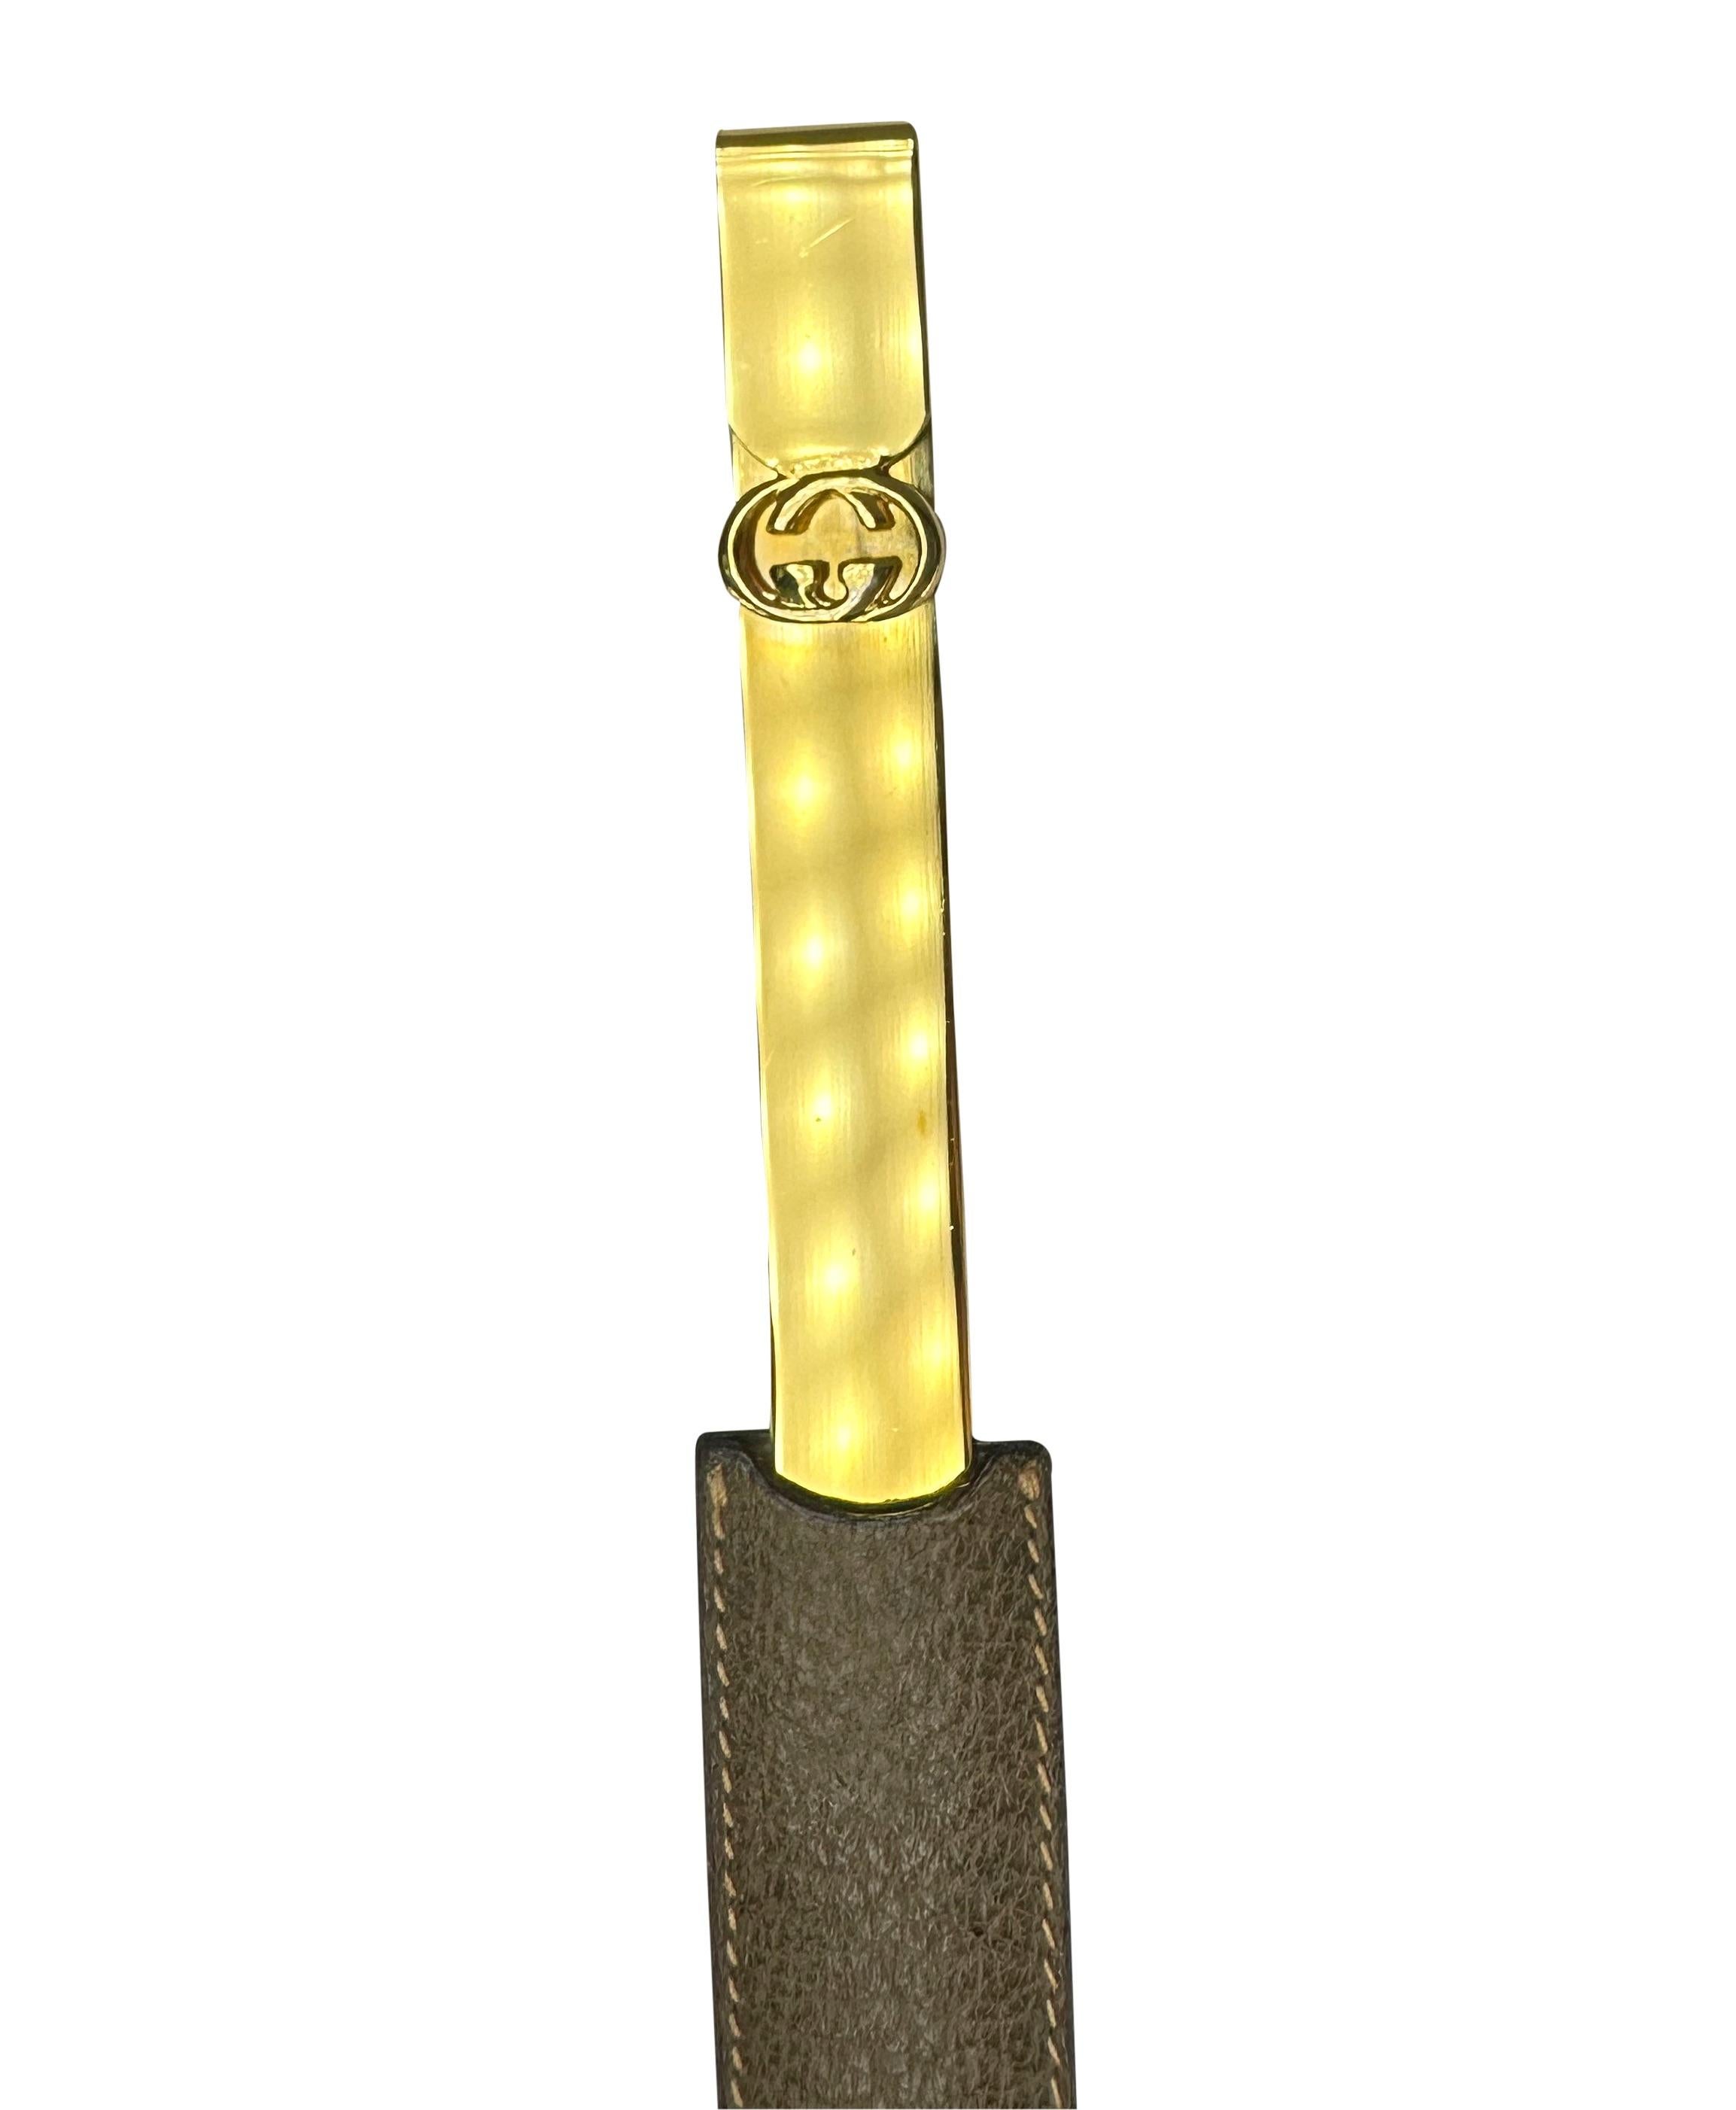 TheRealList presents: a fabulous gold tone 'GG' Gucci letter opener/bookmark. From the 1970s, this elegant Gucci letter opener and bookmark is constructed in gold-tone metal and features a 'GG' logo at the top. This beautiful vintage piece is made